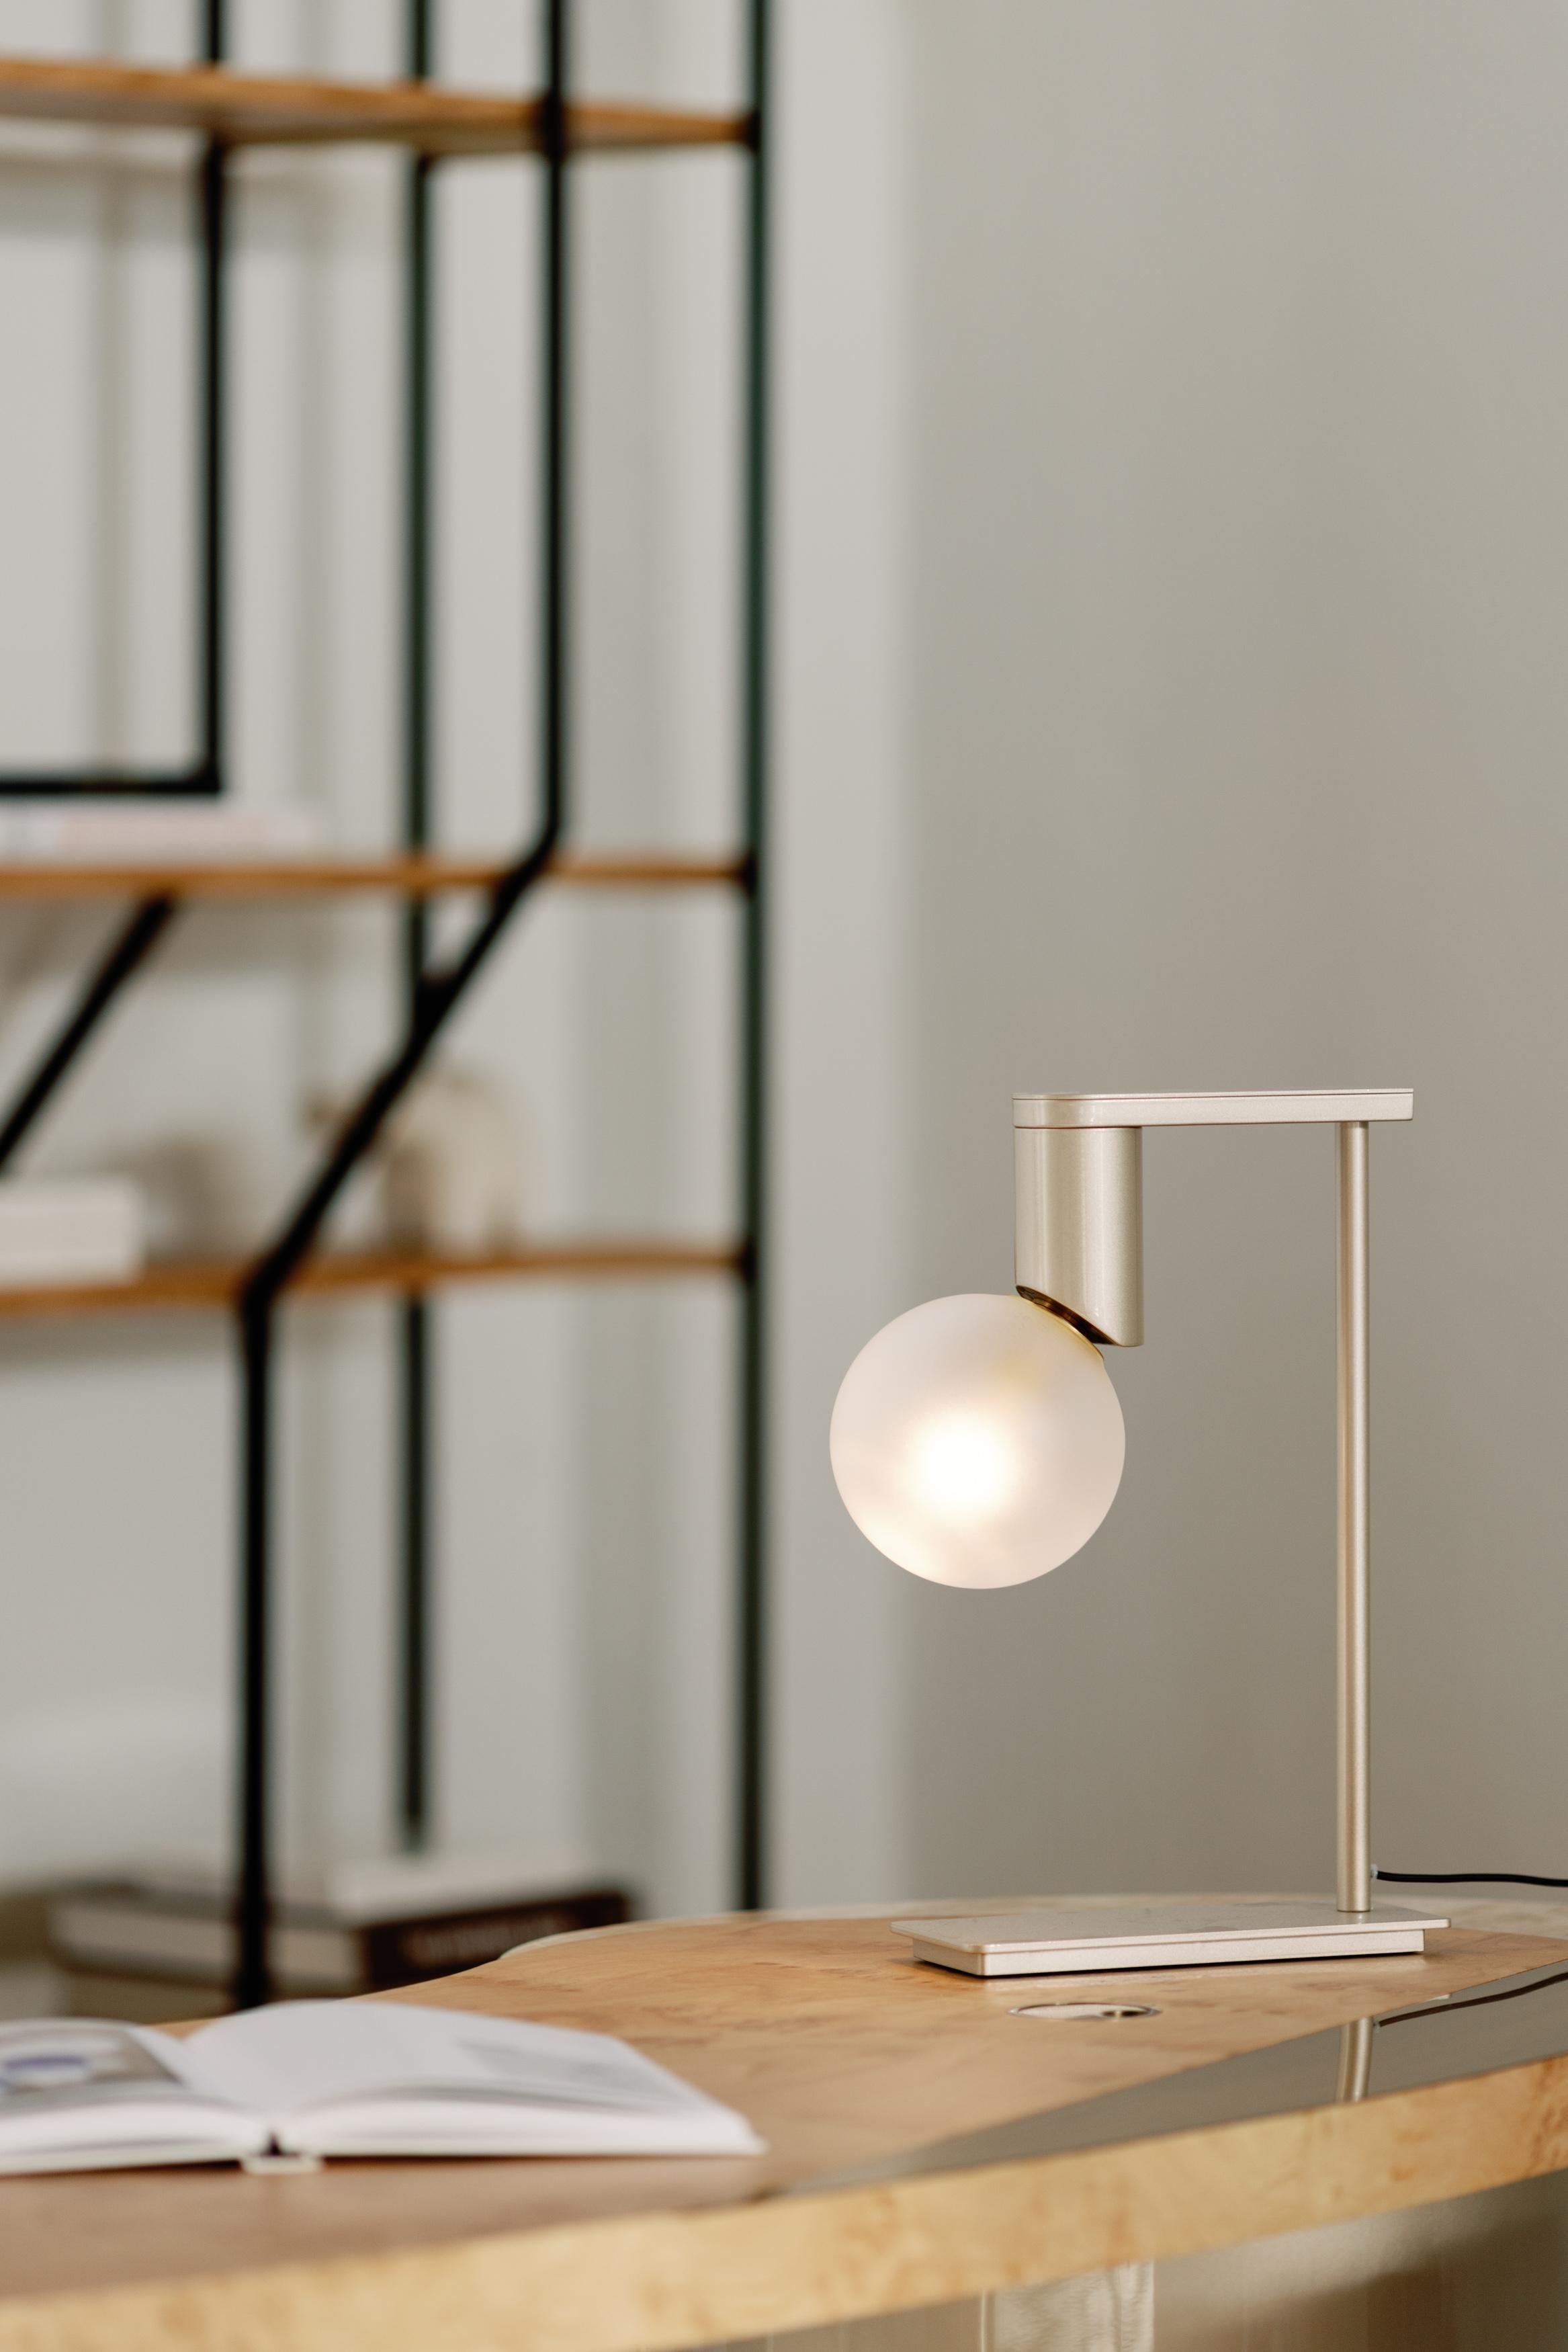 Bobo Table Lamp, Contemporary Collection, Handcrafted in Portugal - Europe by Greenapple.

The Bobo modern table lamp brings the creative vision to life through its unique design, enhancing the atmosphere of the modern home. Redefining the concepts